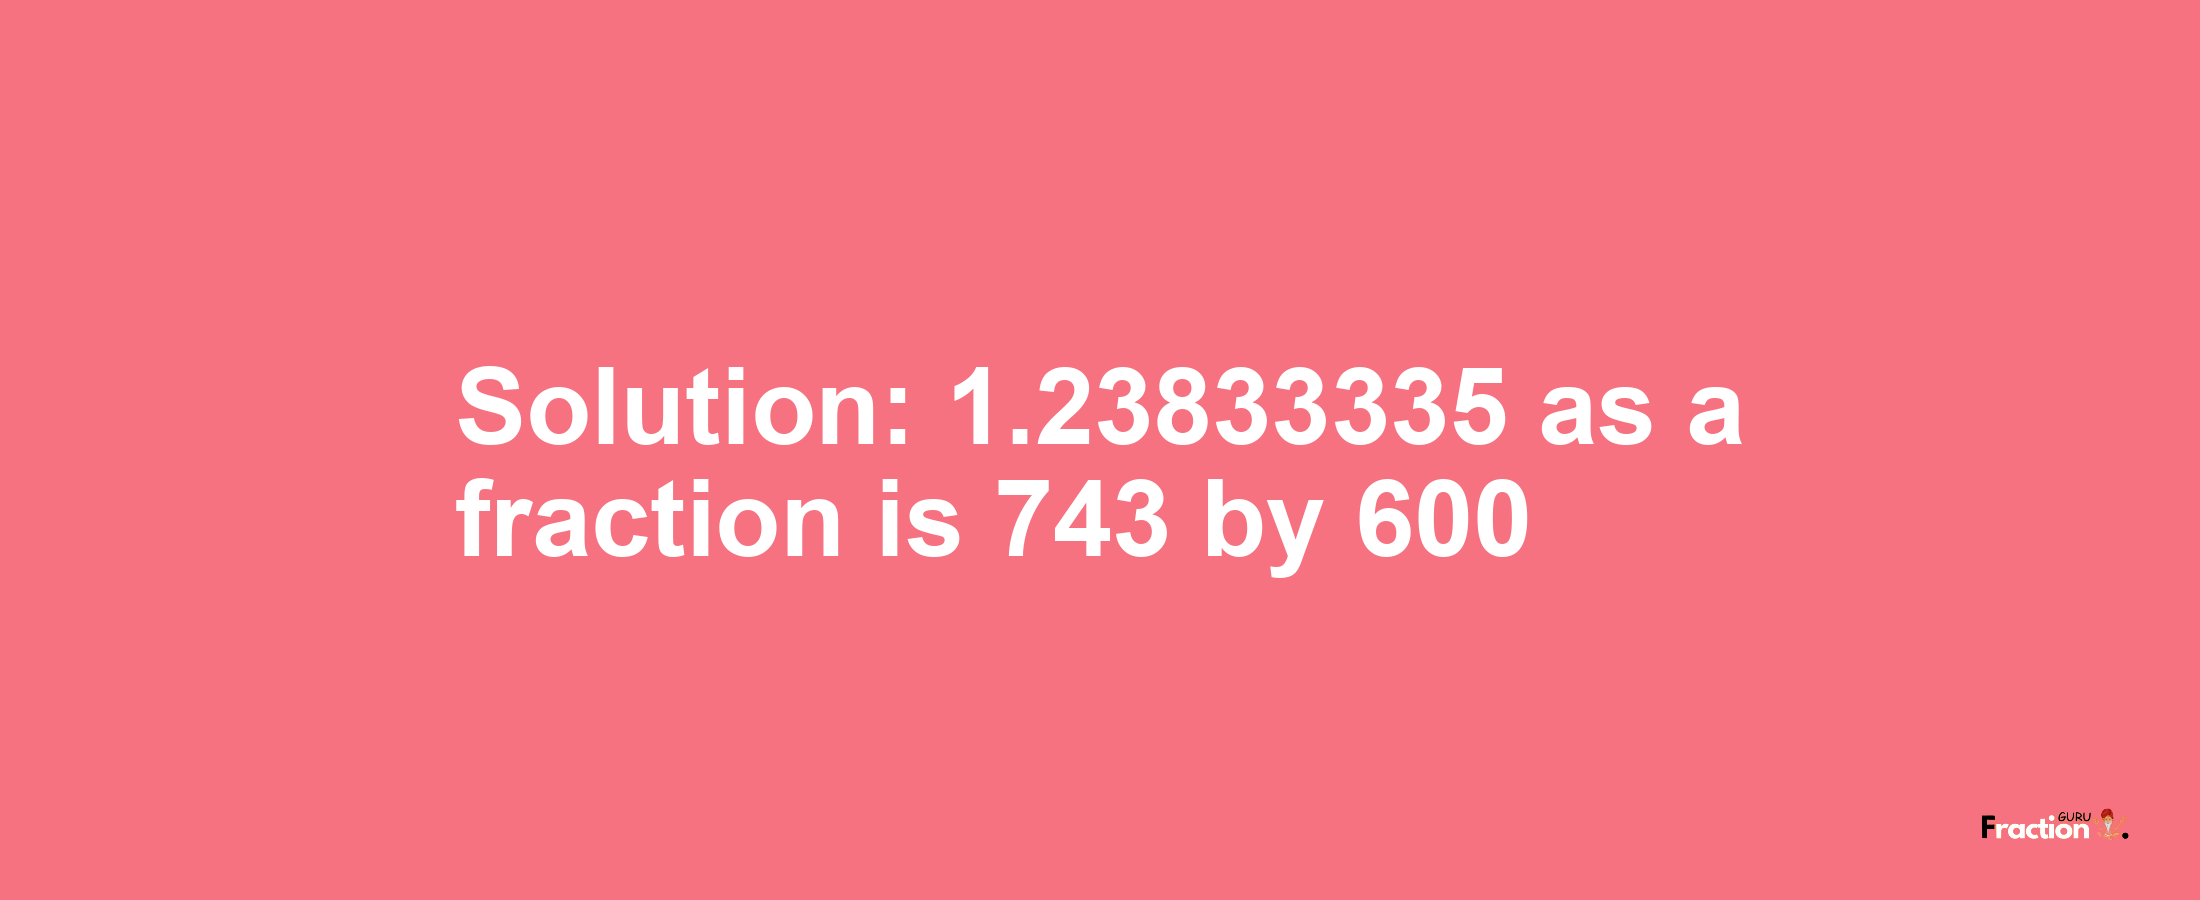 Solution:1.23833335 as a fraction is 743/600